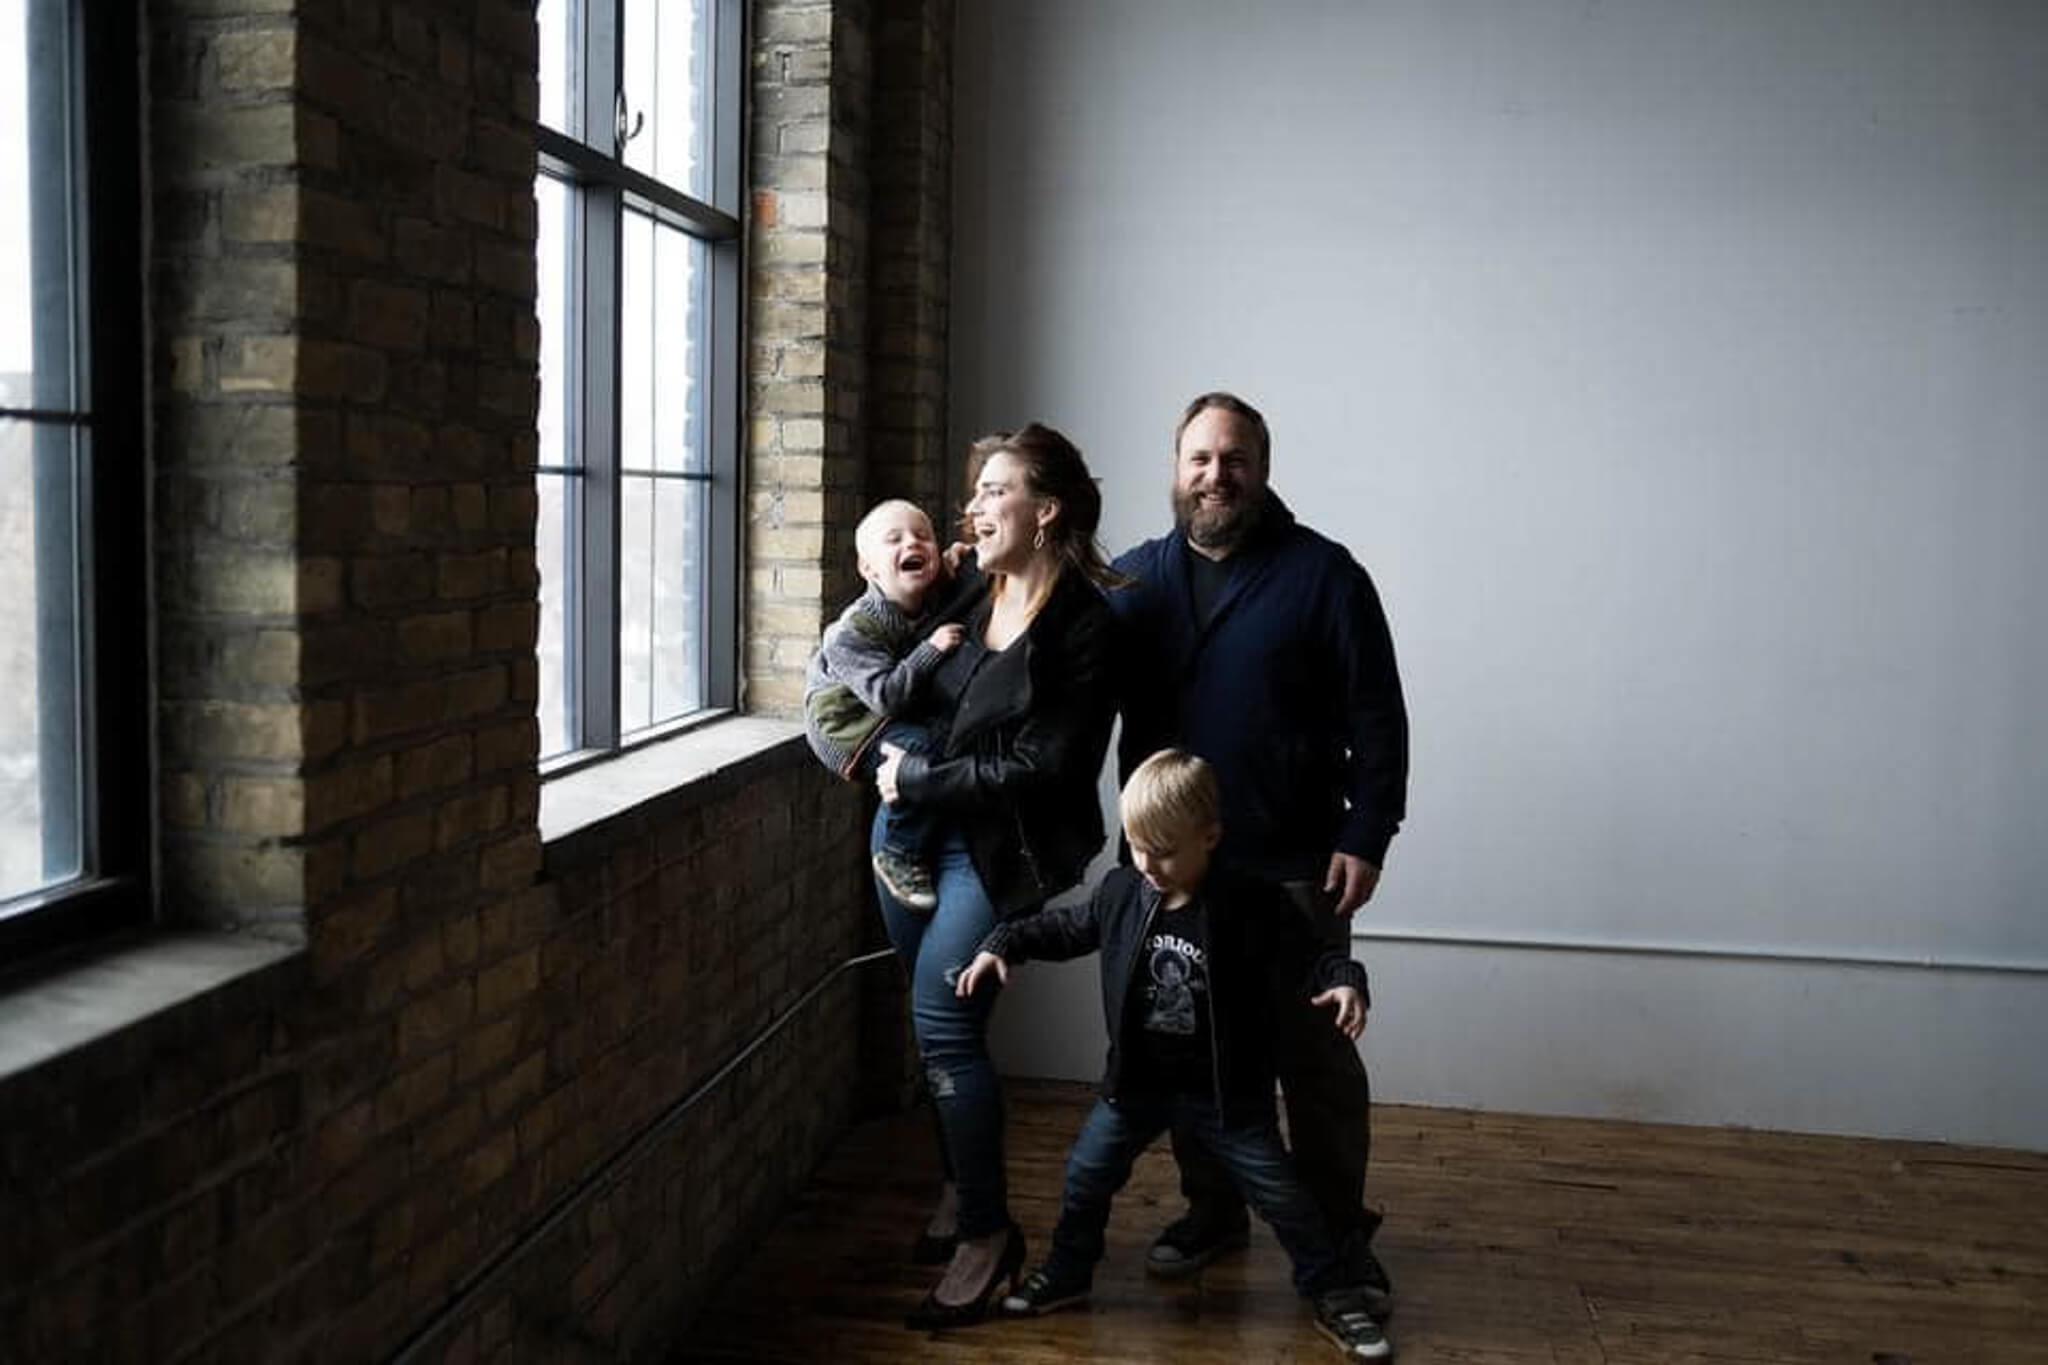 Jessica Strobel posed with her family in a minimal minneapolis photography studio